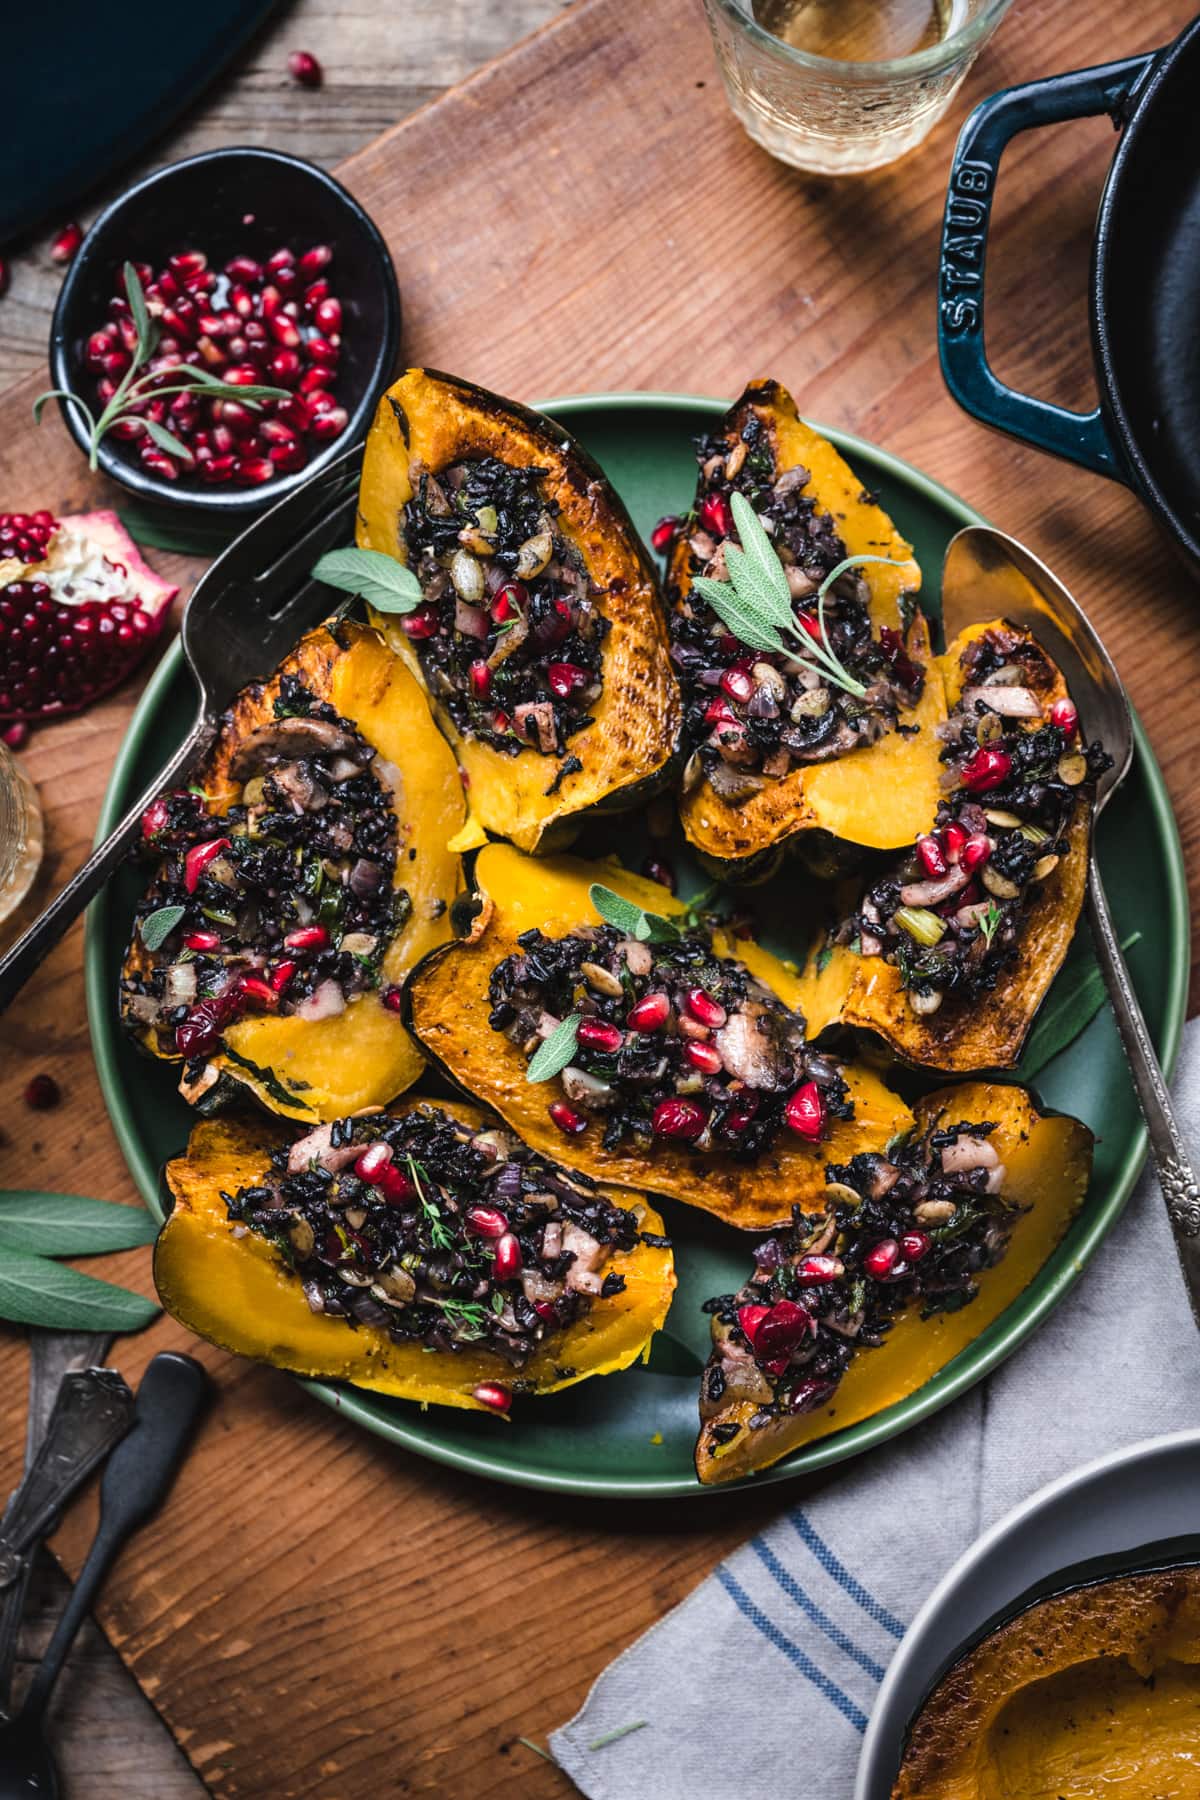 overhead view of slices of vegan stuffed acorn squash with black rice, mushrooms and pomegranate seeds on top.